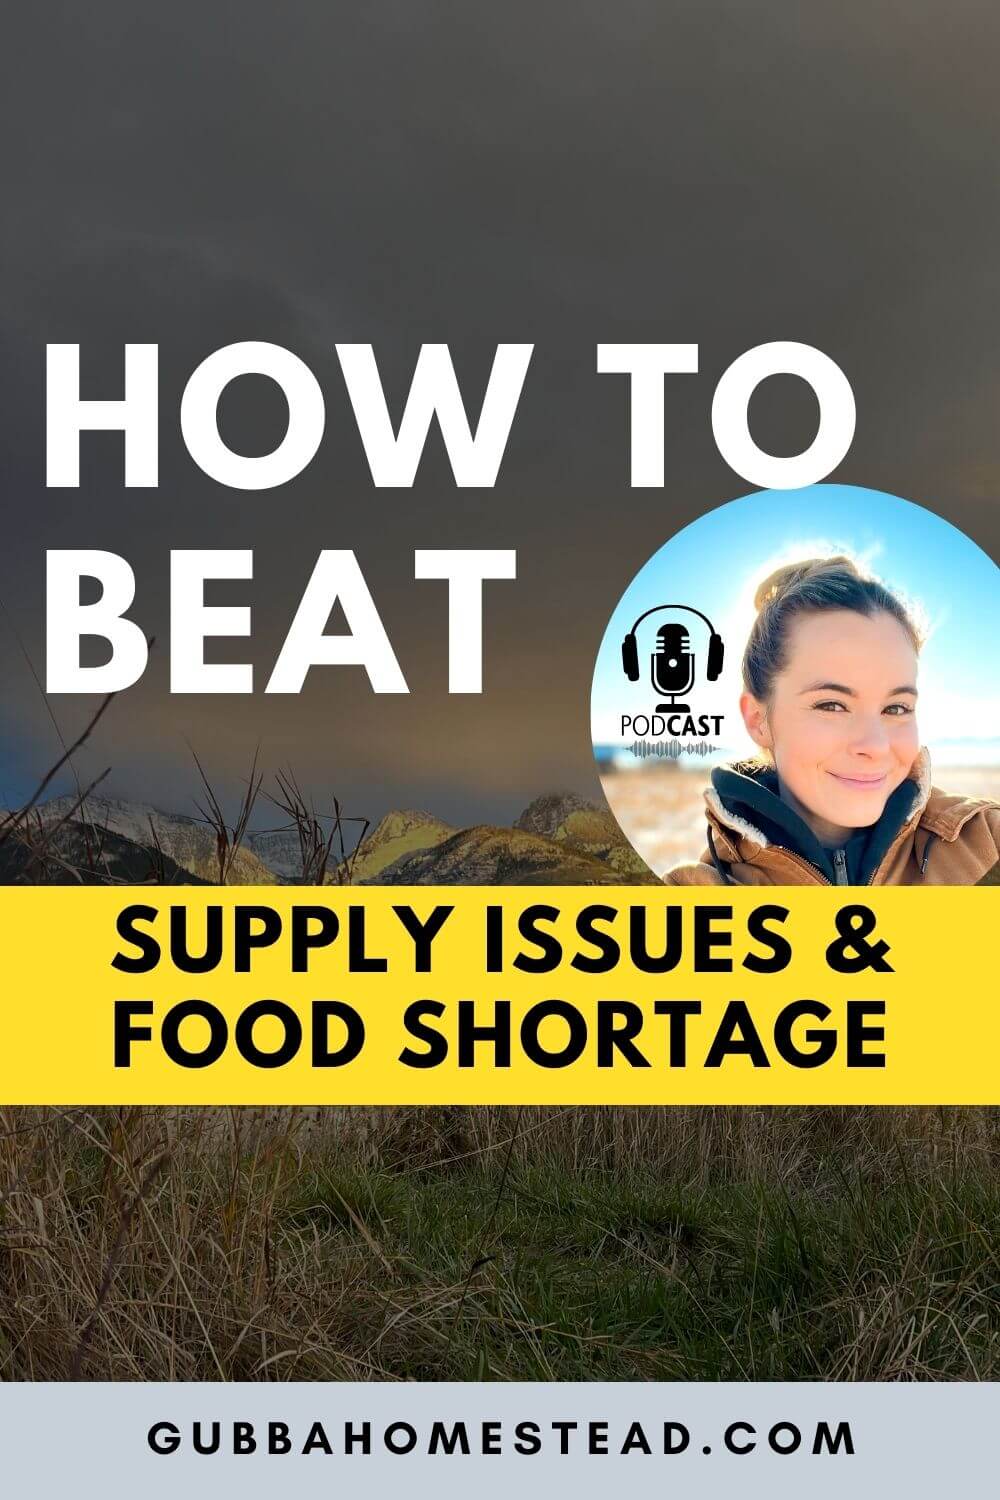 How To Beat The Supply Issues and Food Shortage